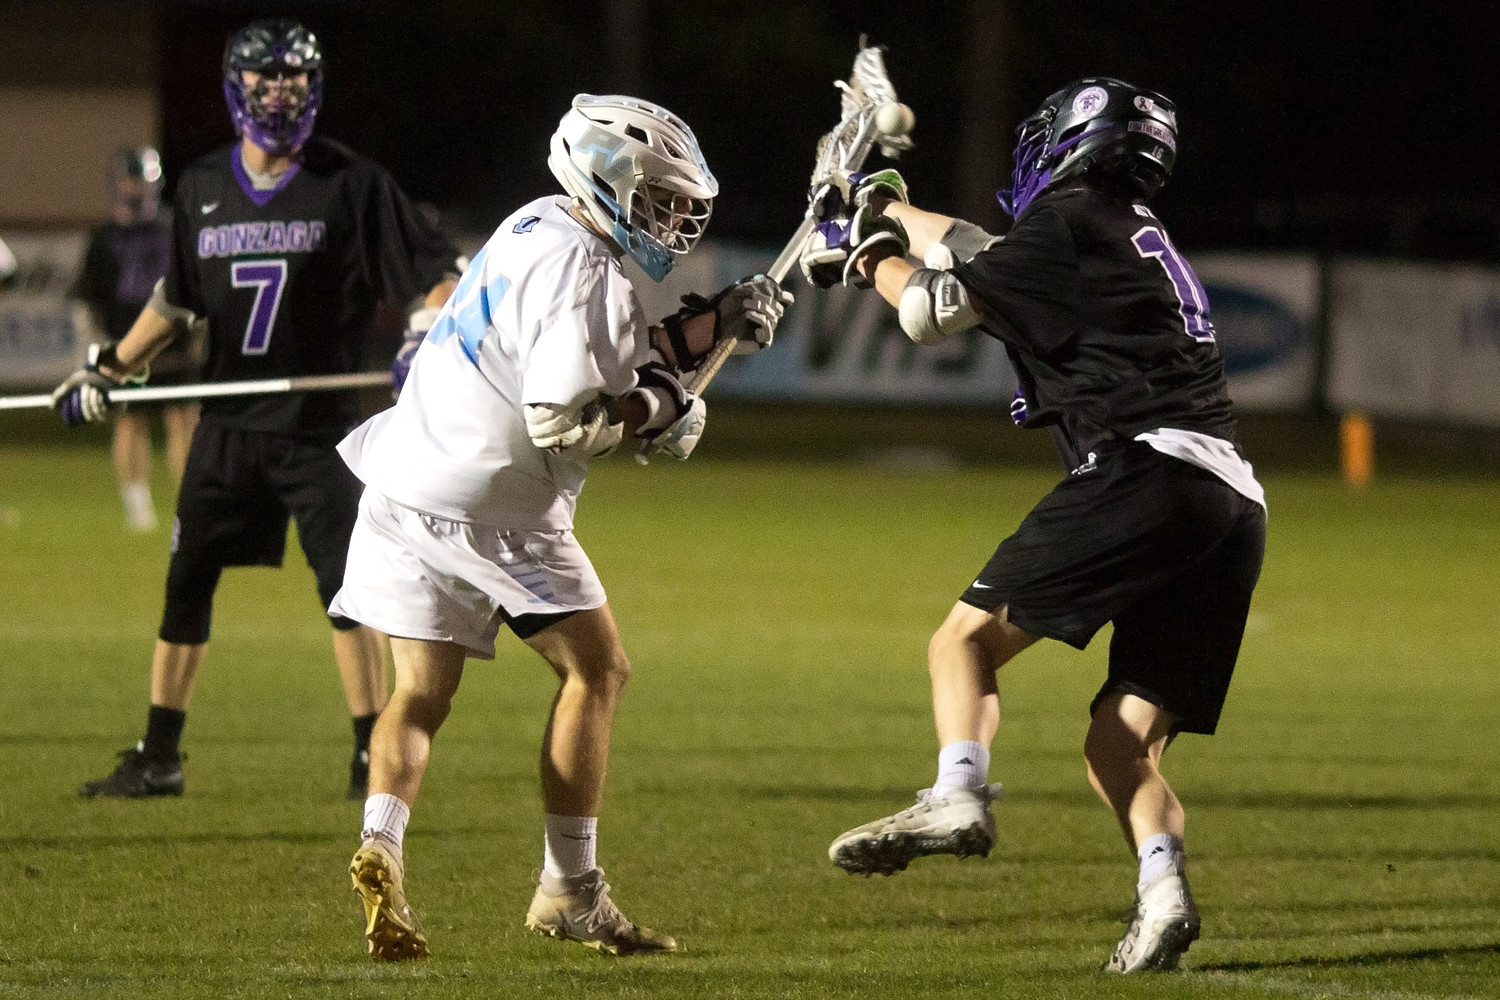 The Sharks’ Jack Burke fights to control the ball.